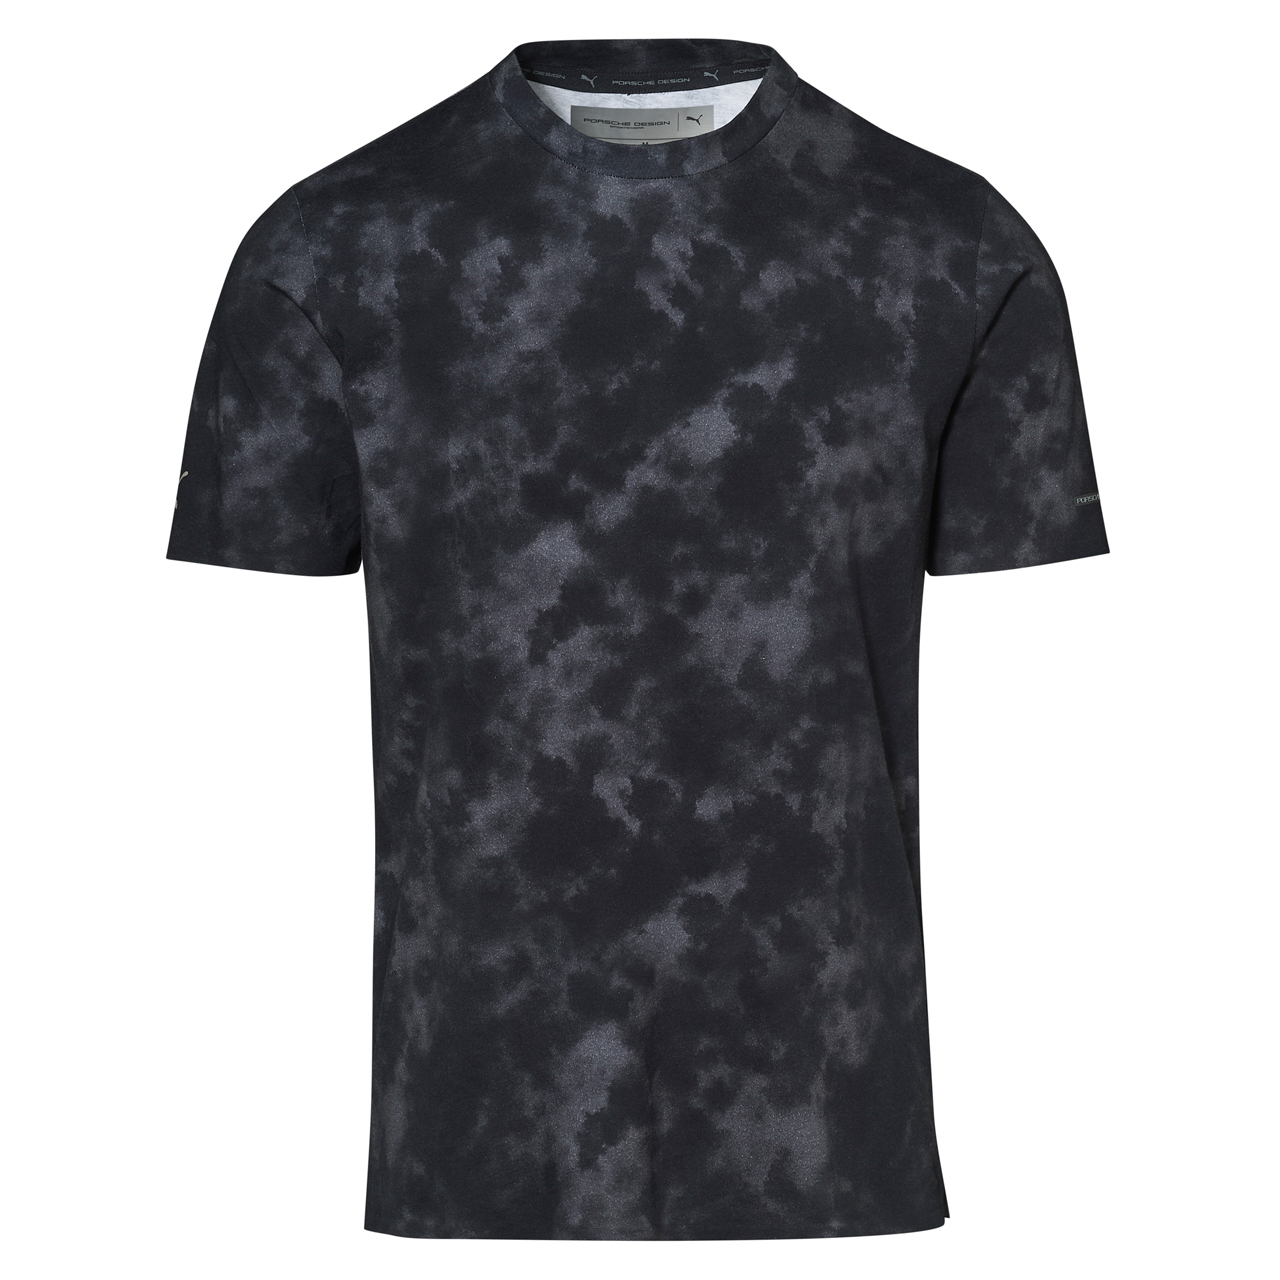 Evoknit T-Shirt - Exclusive Sports Polo & T-Shirts for Men 